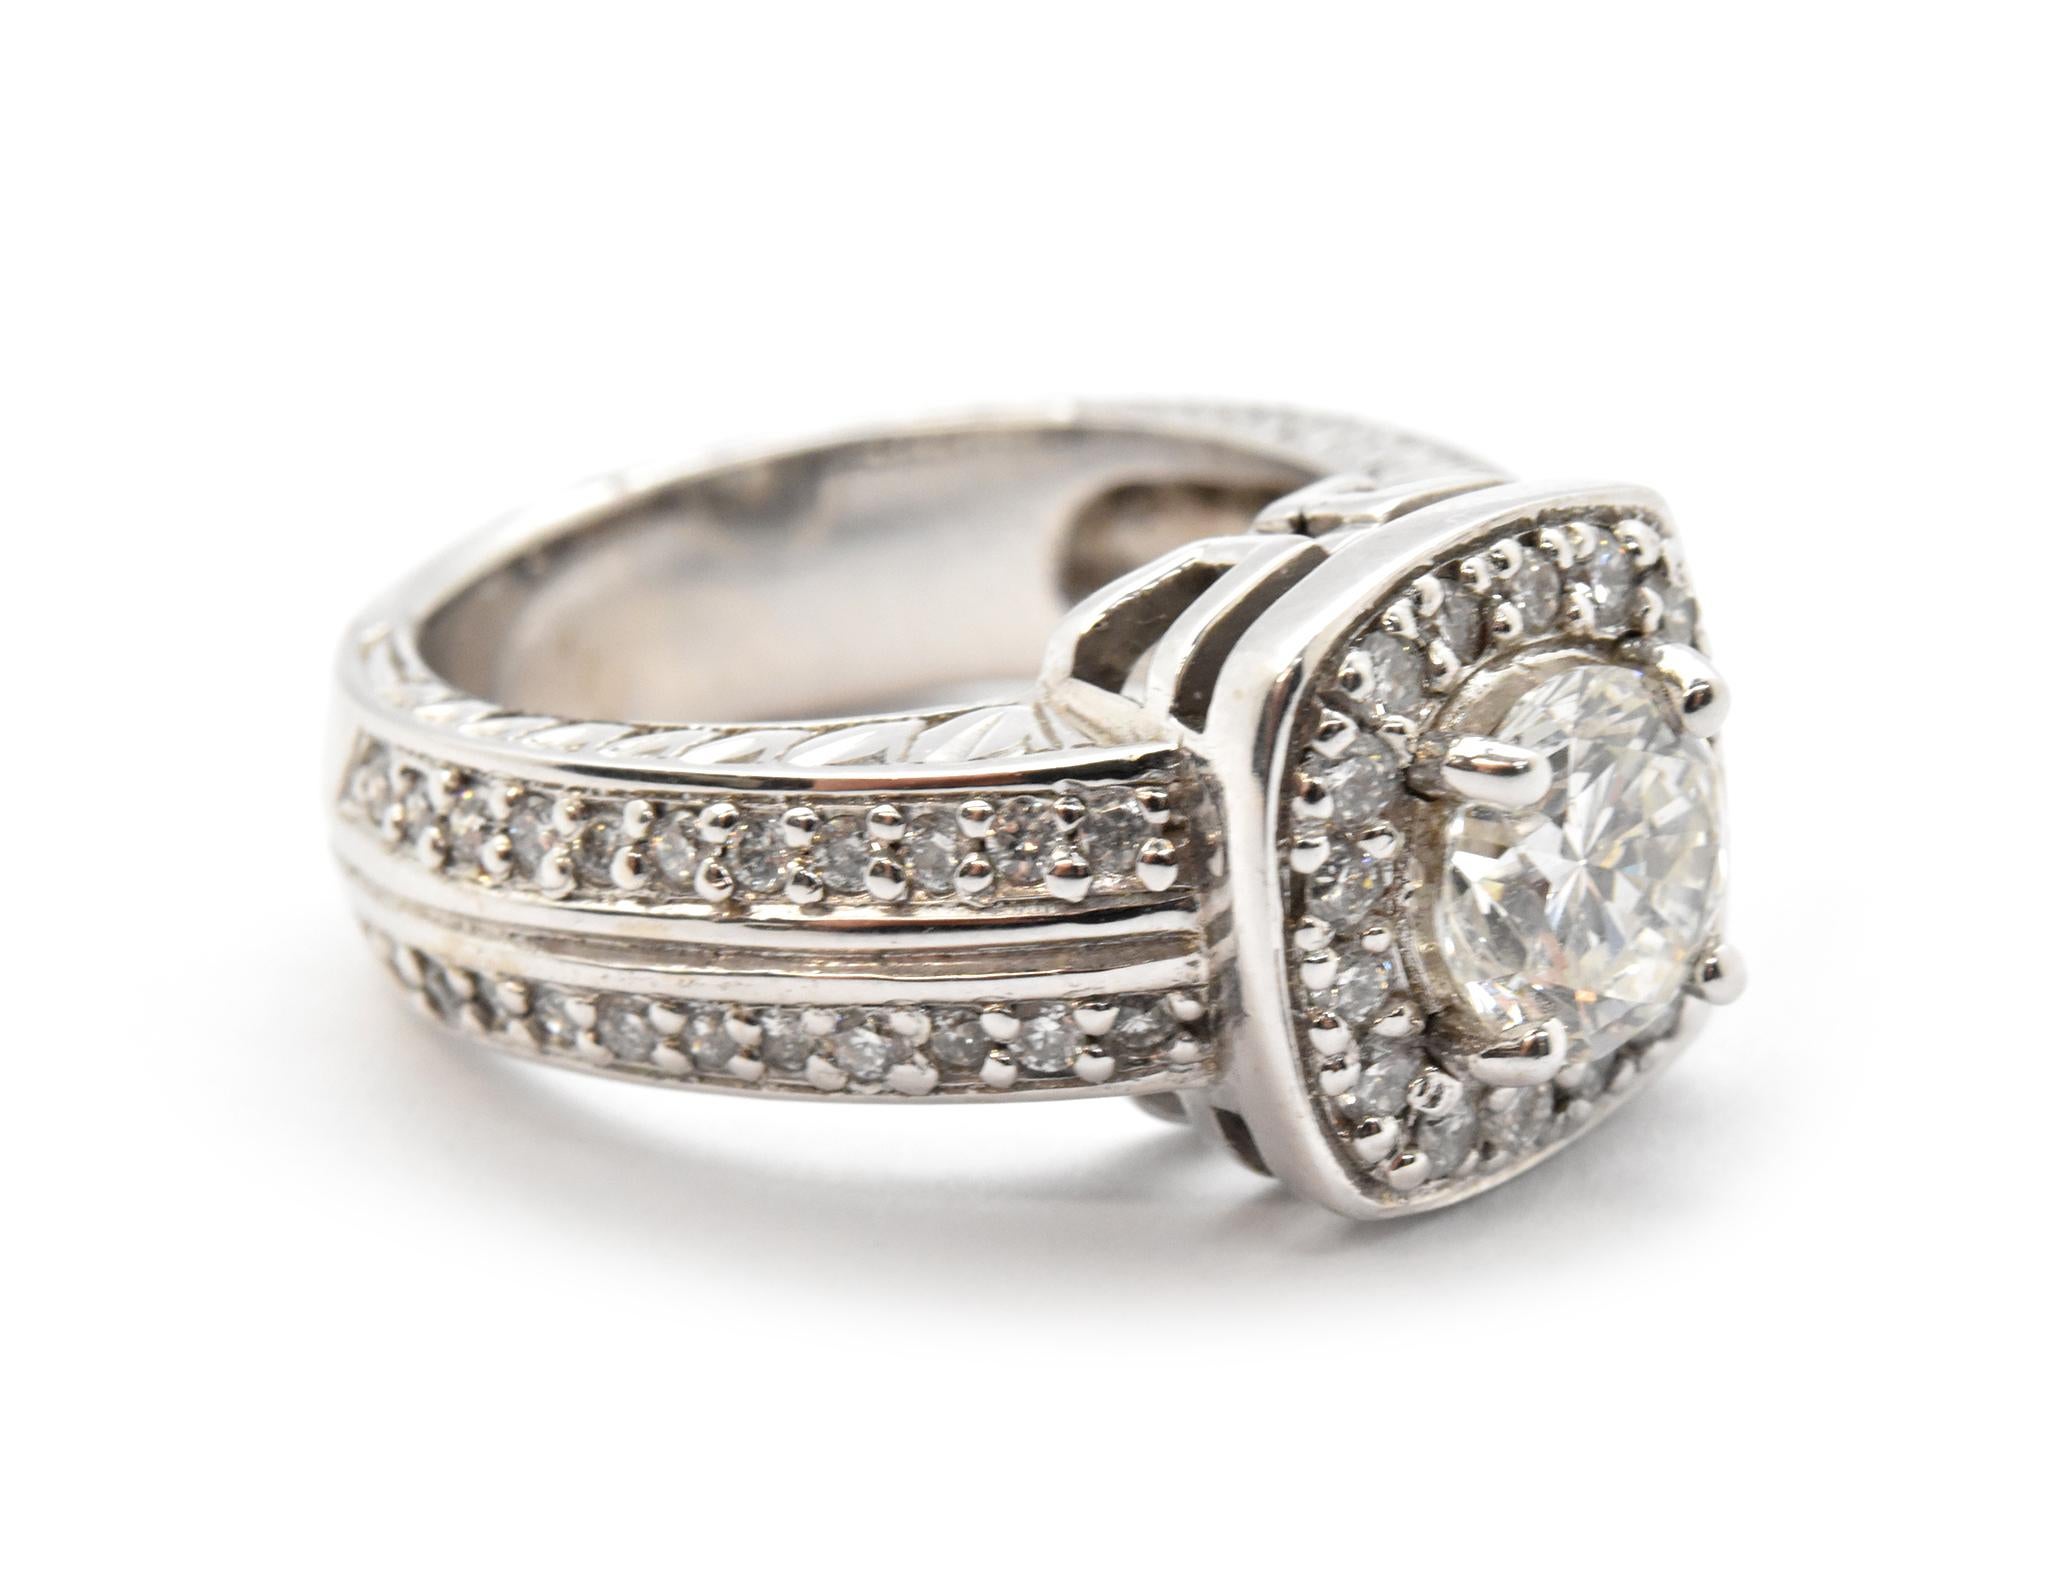 This ring is made in 14k white gold. It holds a 0.78-carat round brilliant diamond that is graded F in color and VS1 in clarity. The center stone is surrounded by a bezel of smaller round diamonds that extend down the shank. The additional stones